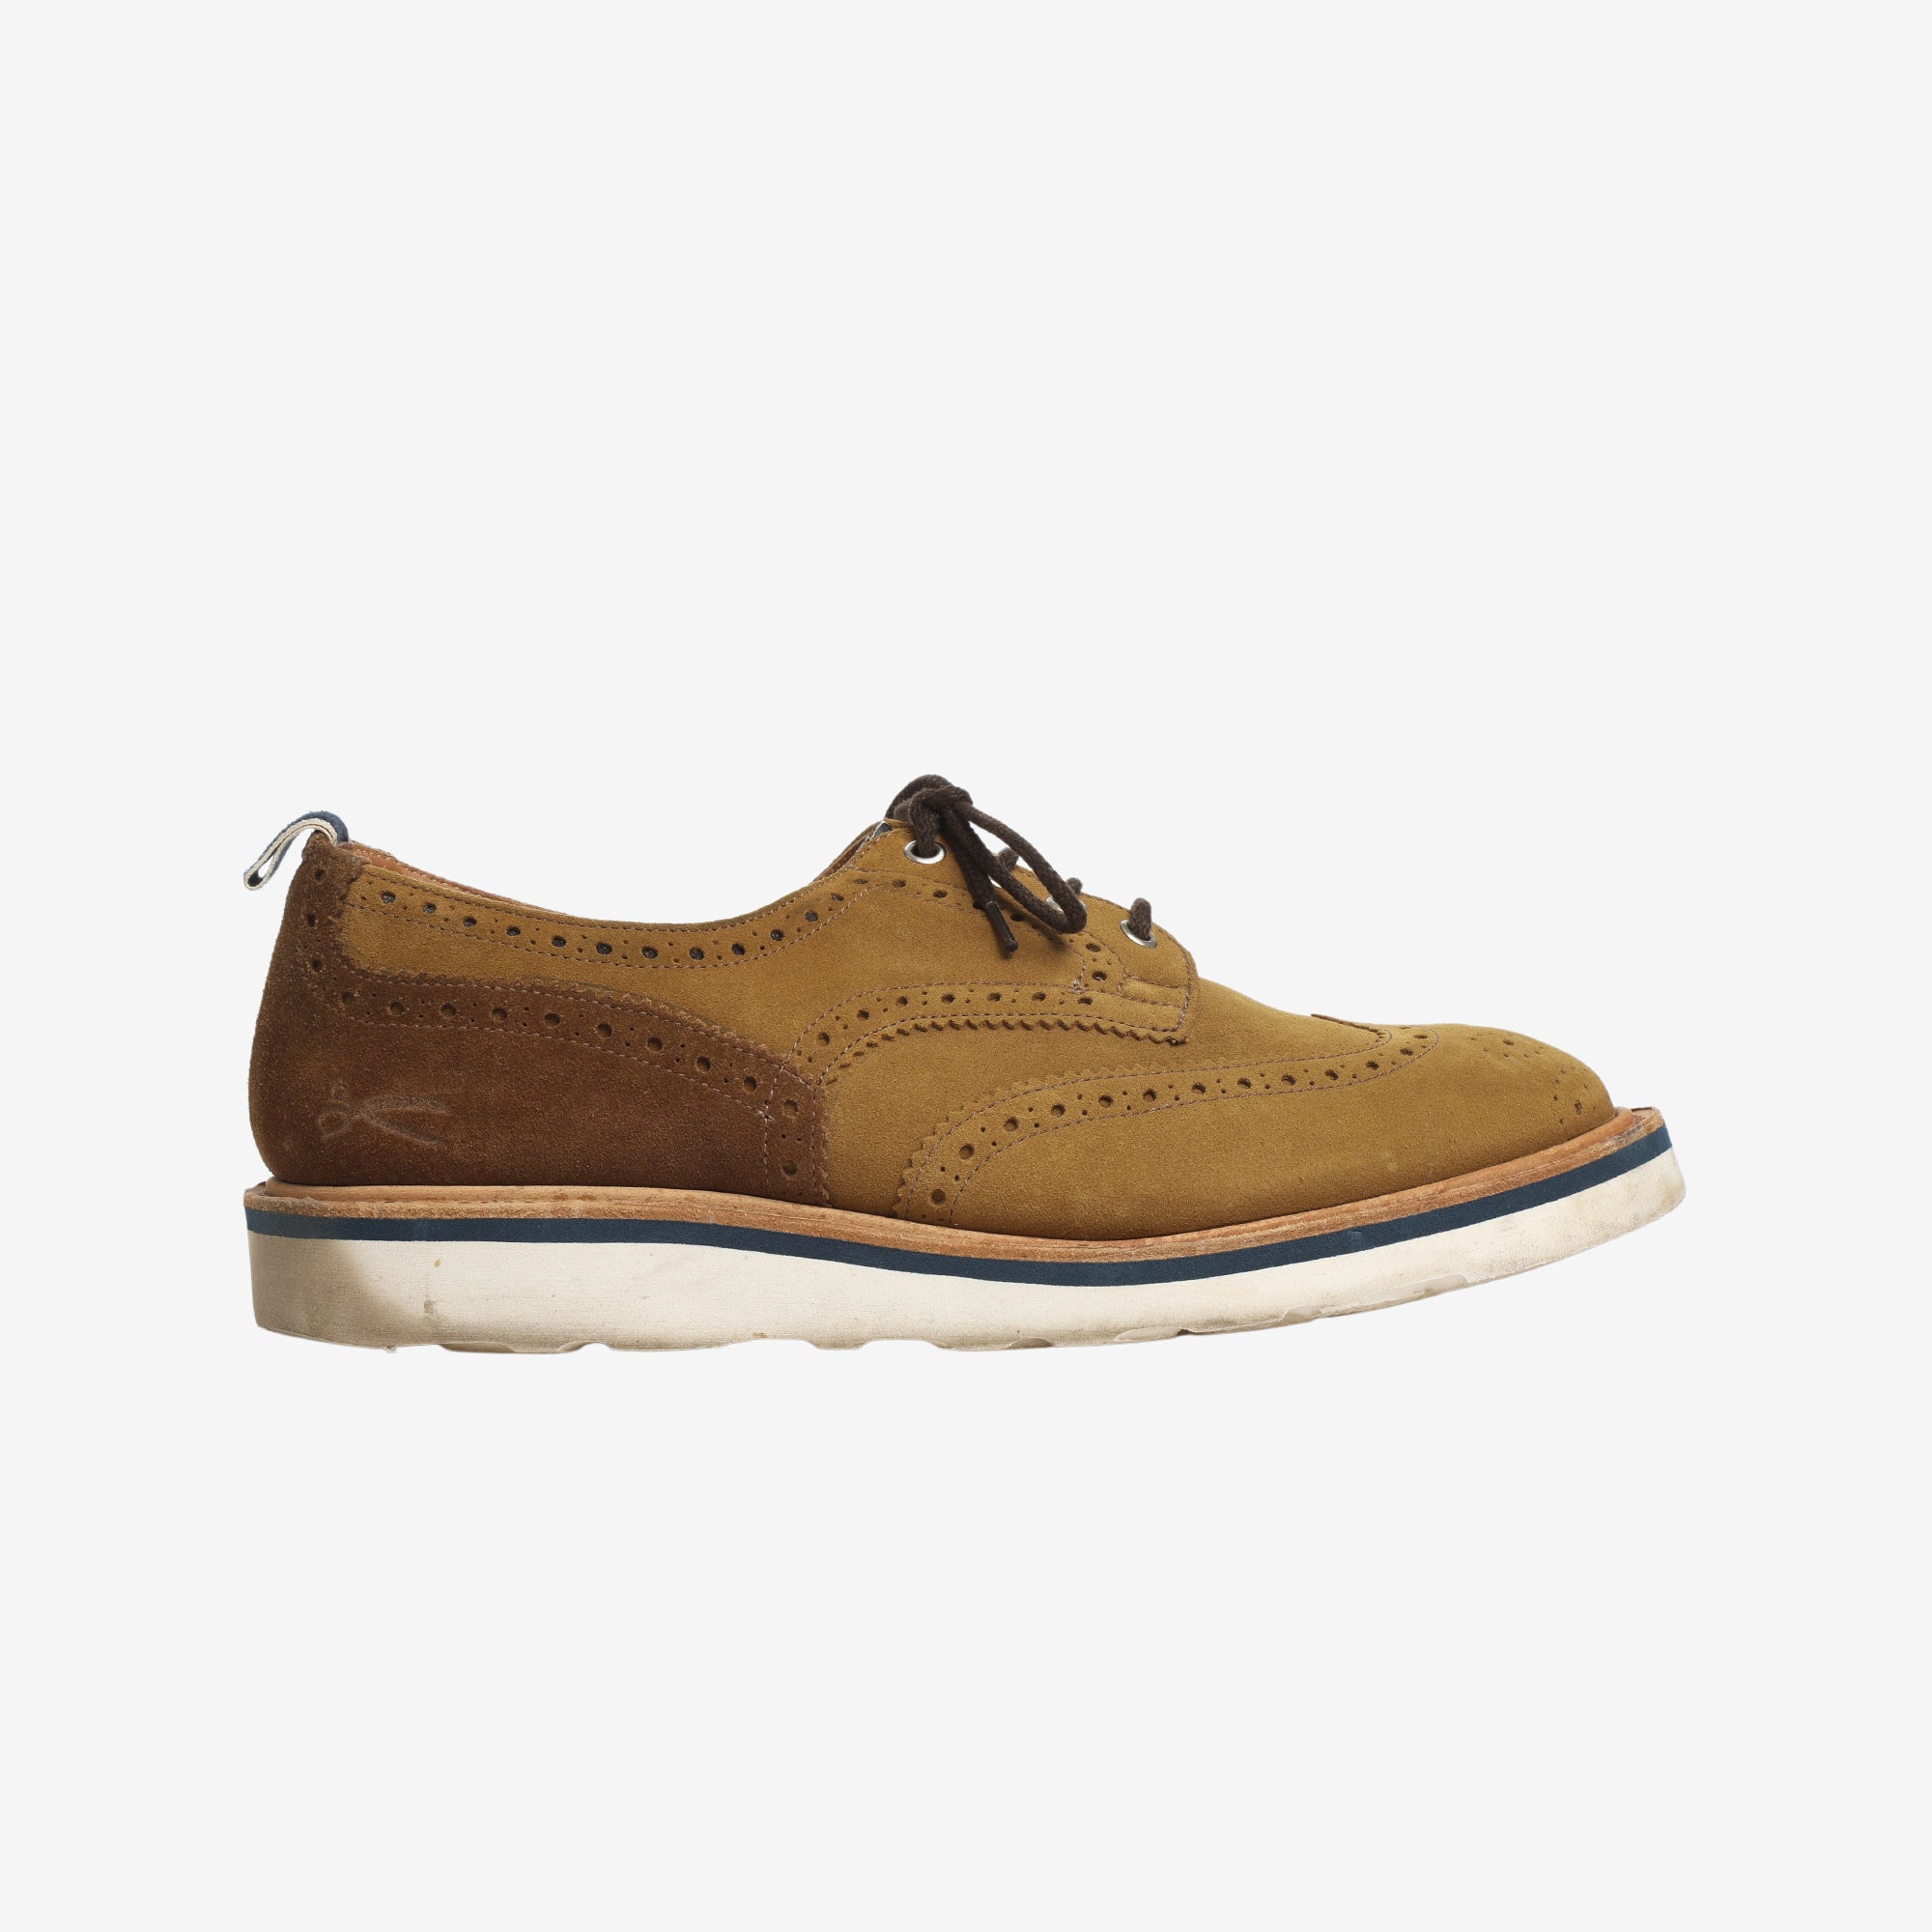 Two-Tone Suede Brogue Shoes